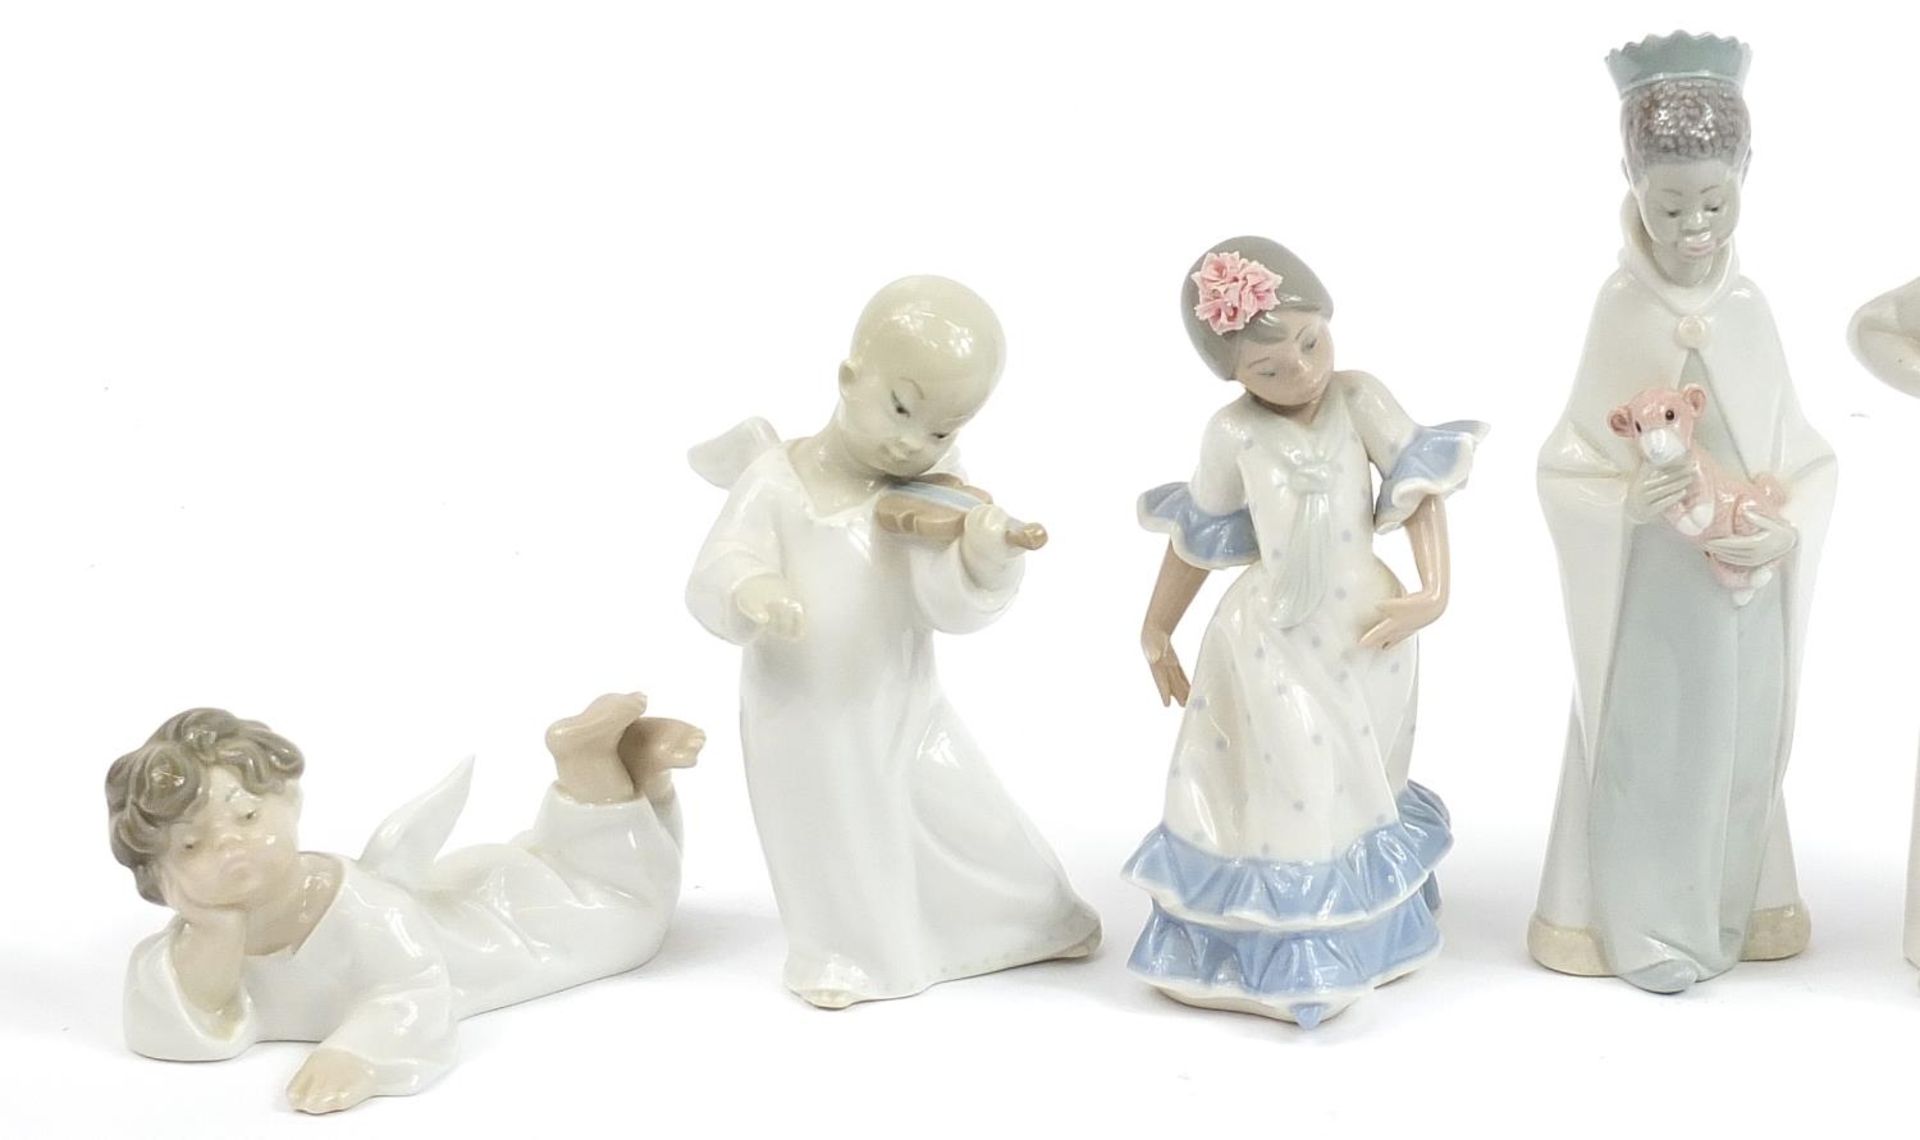 Eight Lladro figures and figurines including a Feliz Dia plaque and angels, the largest 20.5cm high - Image 2 of 4